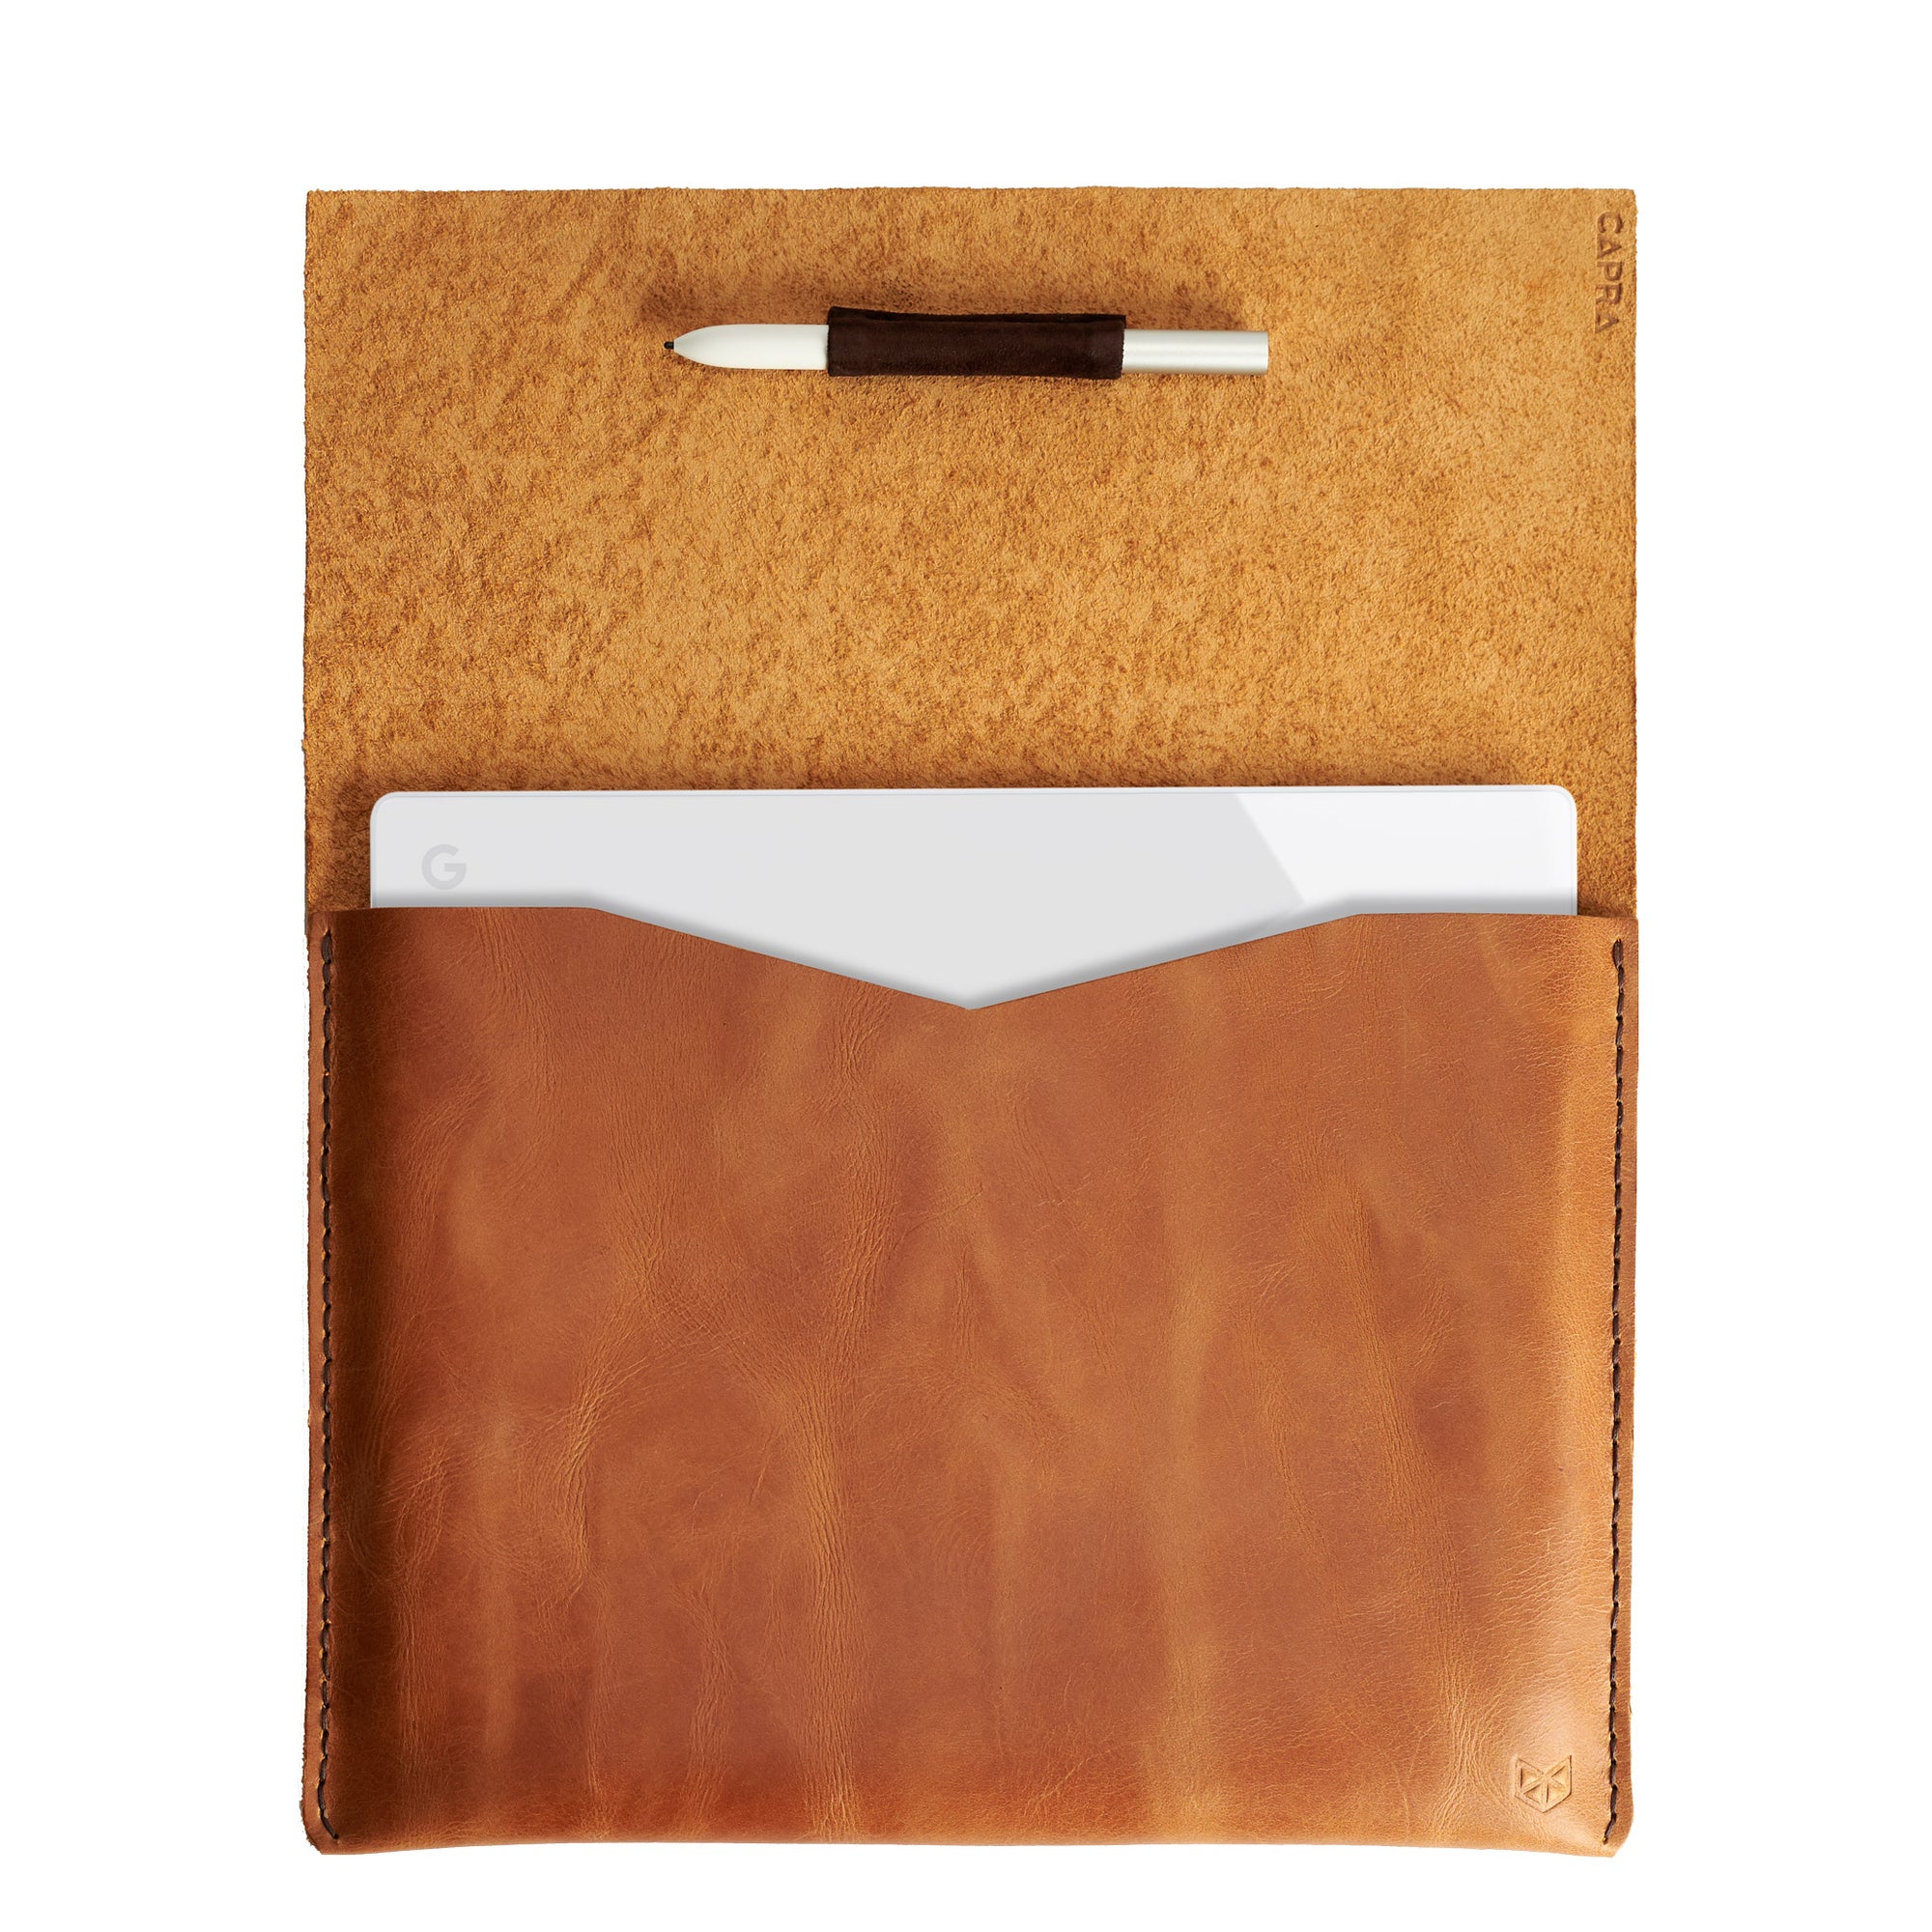 Cover. Google Pixel Slate Tan by Capra Leather